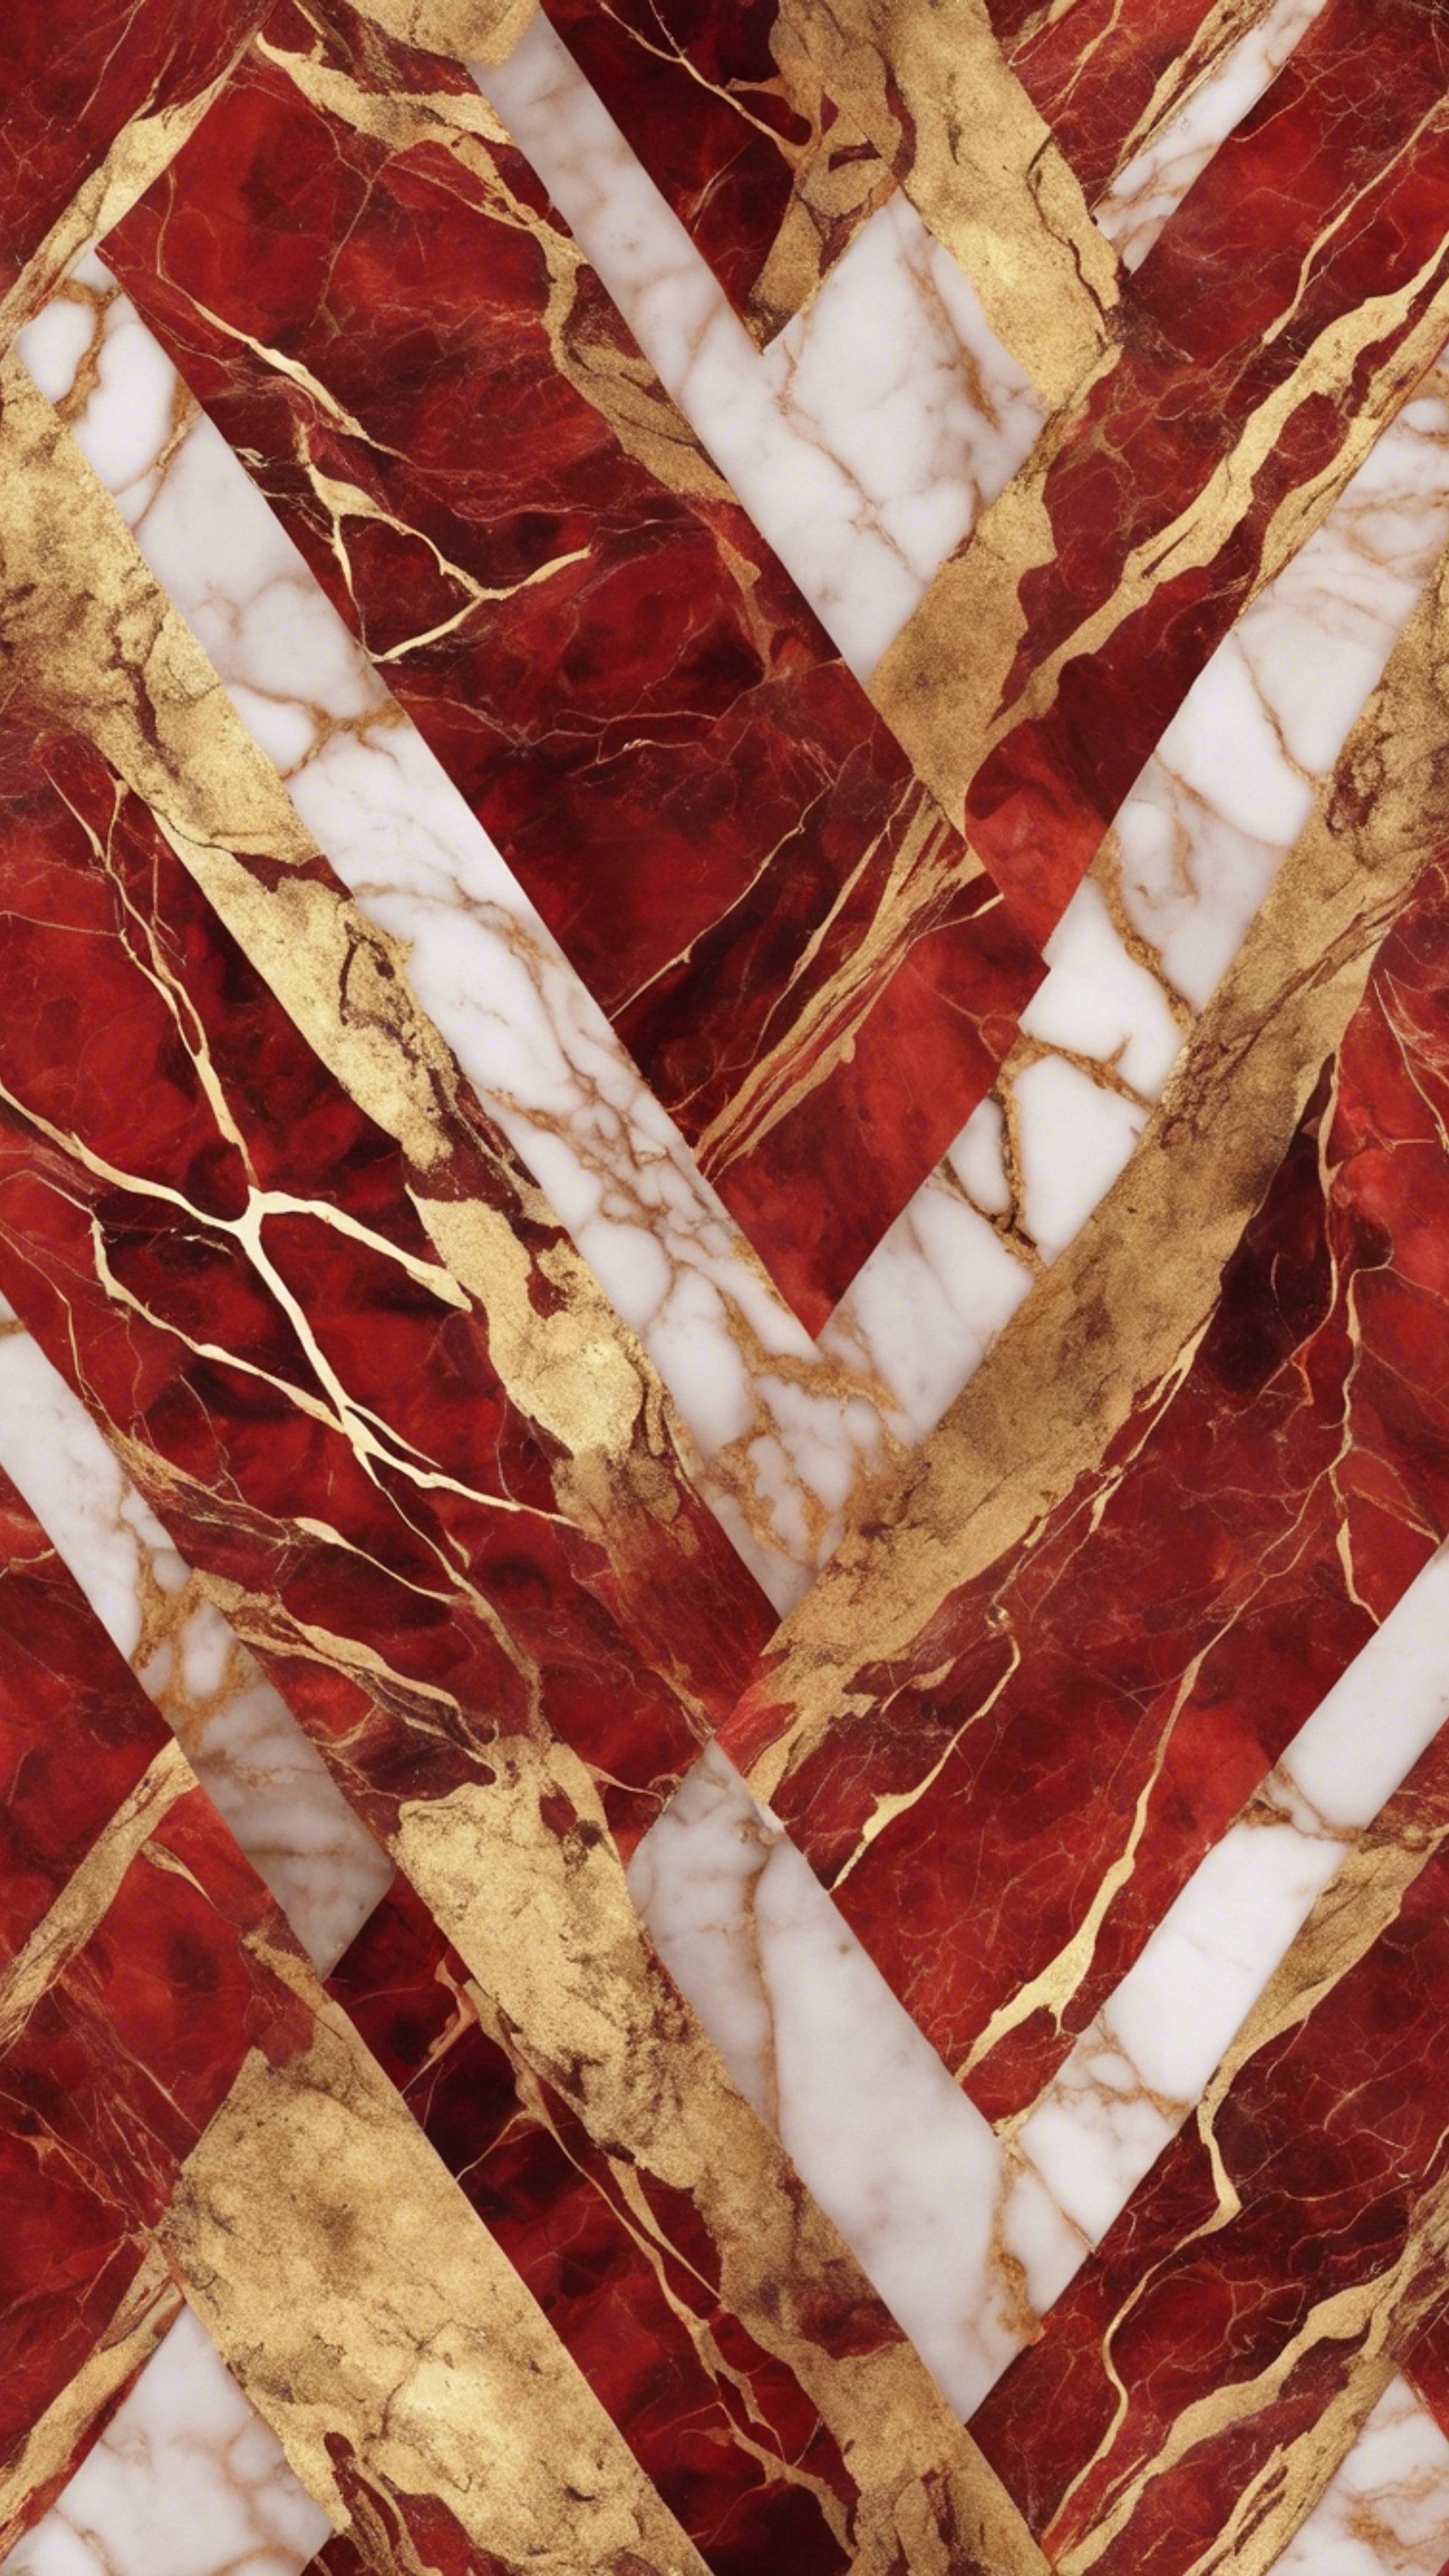 Bold red and gold marble texture overlaying in a harmonious pattern. Tapéta[6b8ff204784241b383b6]